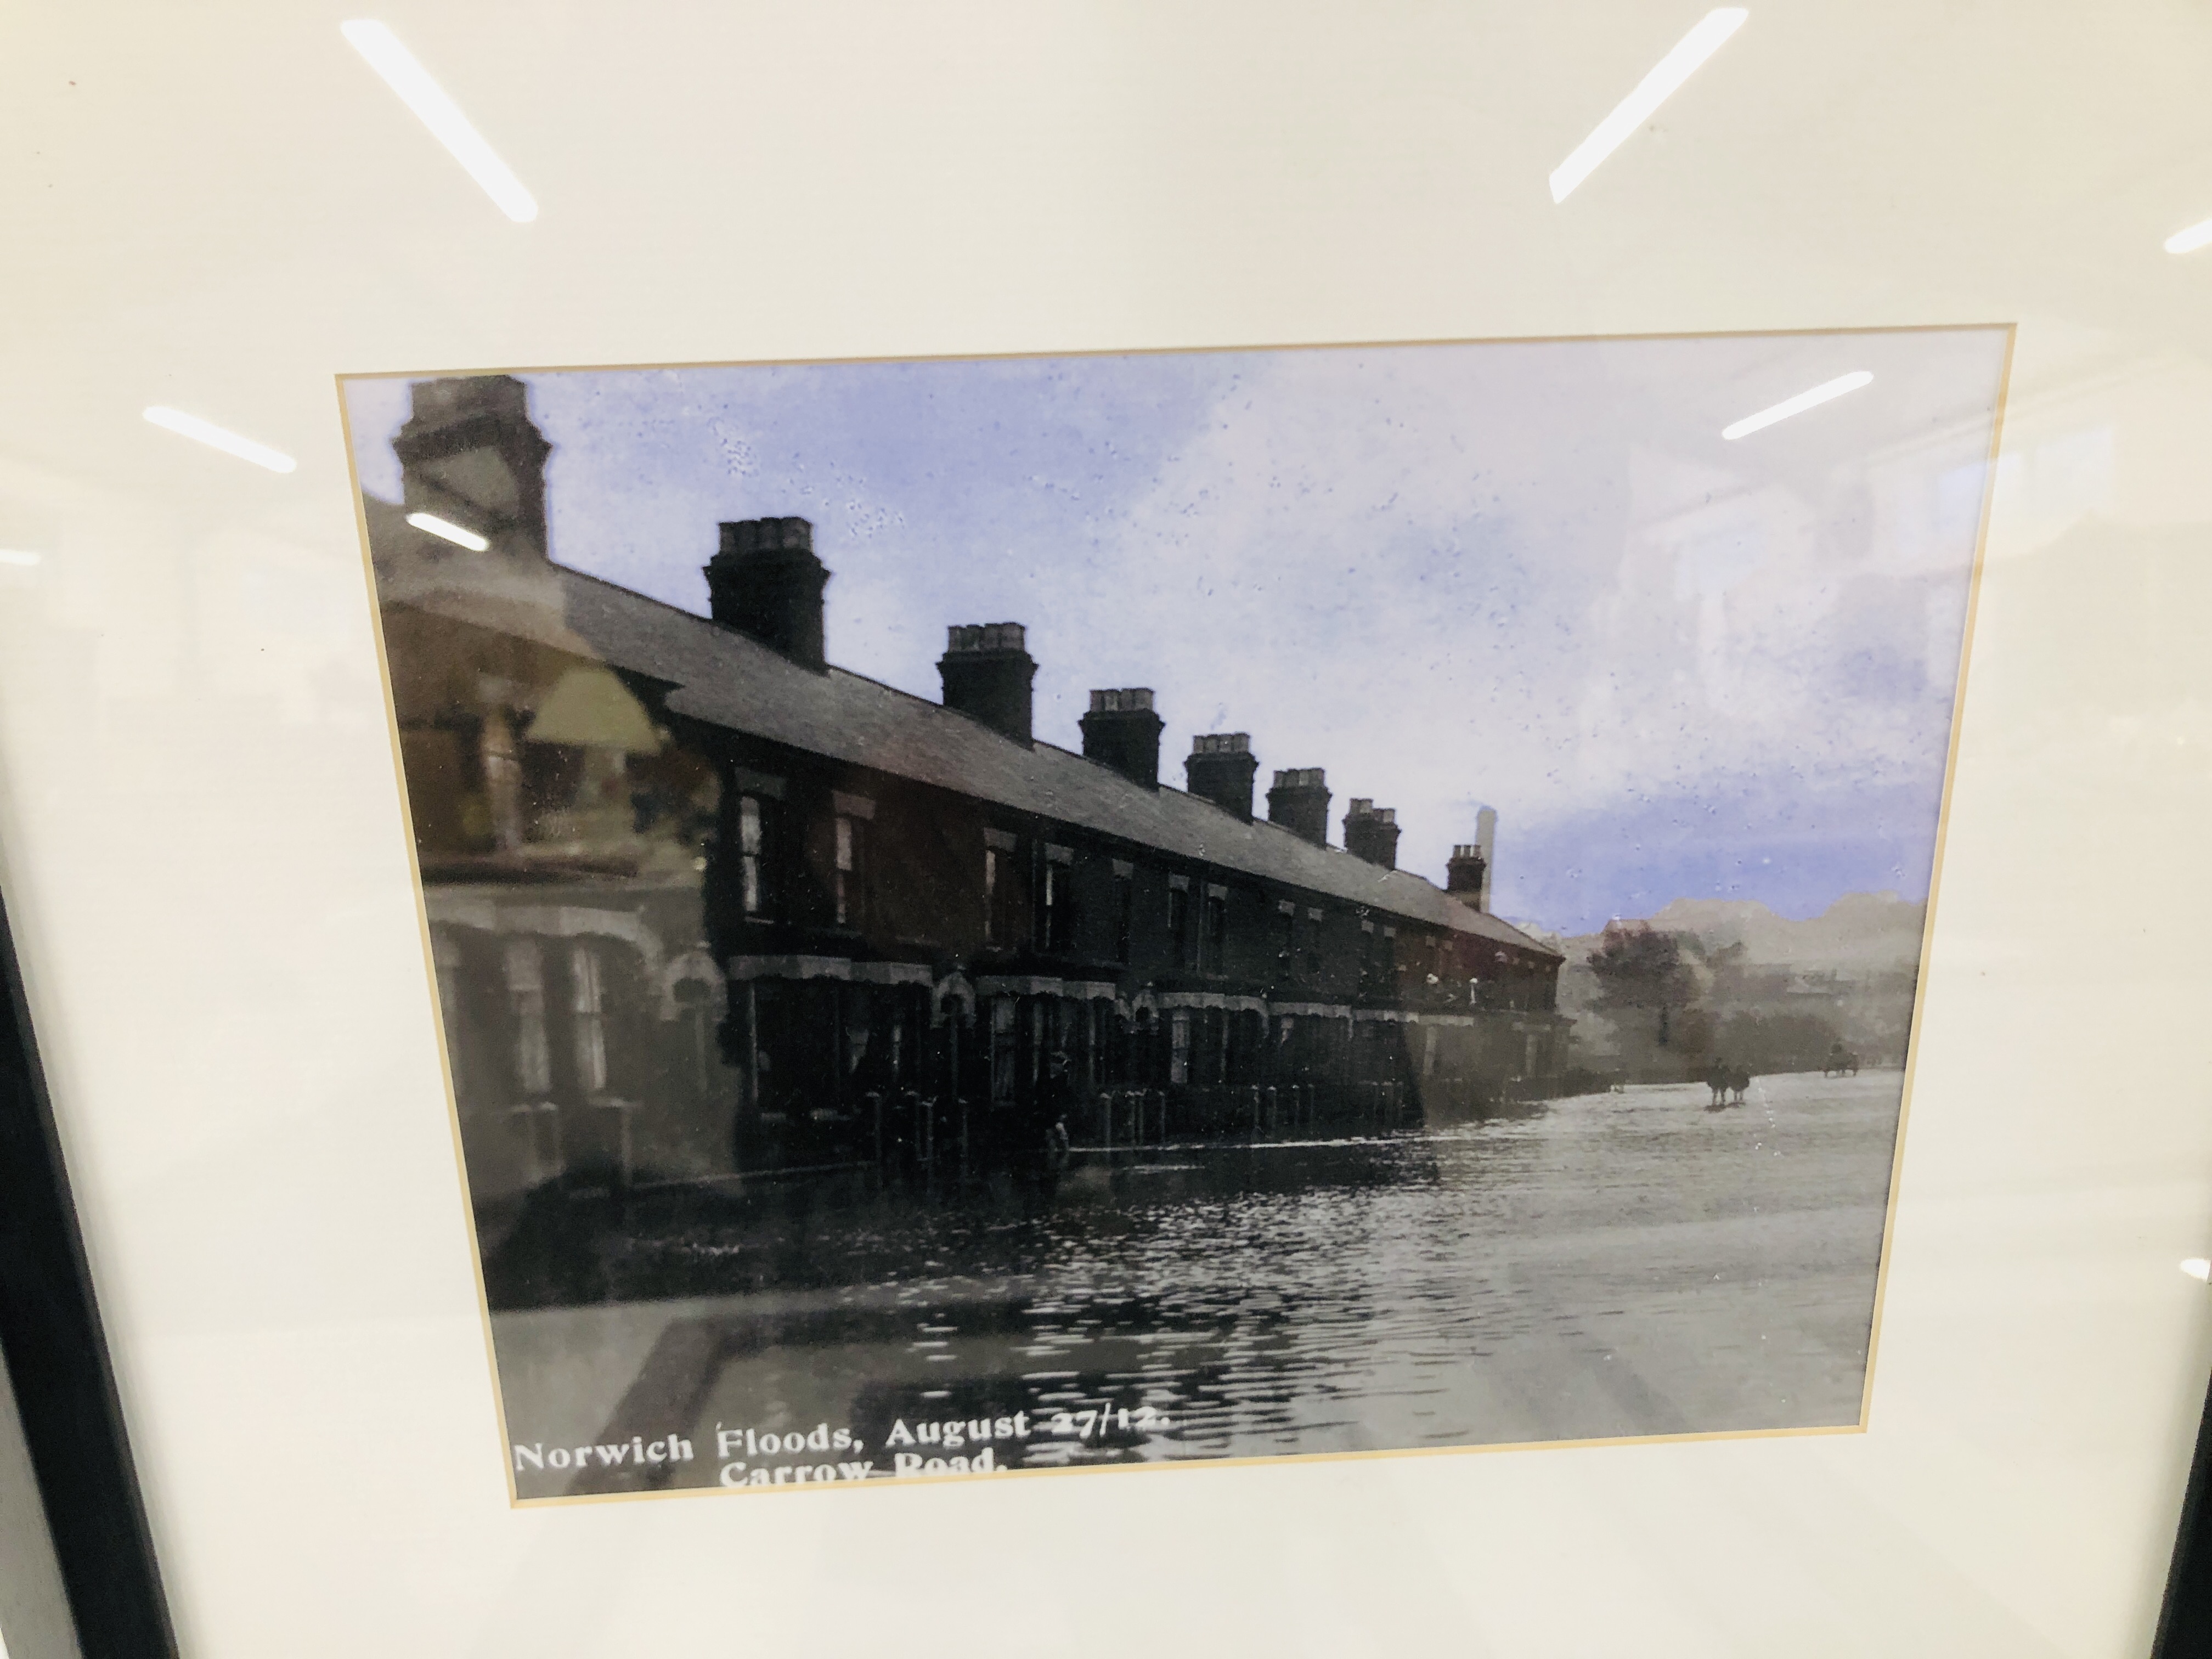 FOUR FRAMED AND MOUNTED LOCAL PHOTOGRAPHS TO INCLUDE NORWICH FLOODS AUGUST 27/12 CARROW ROAD, - Image 6 of 6